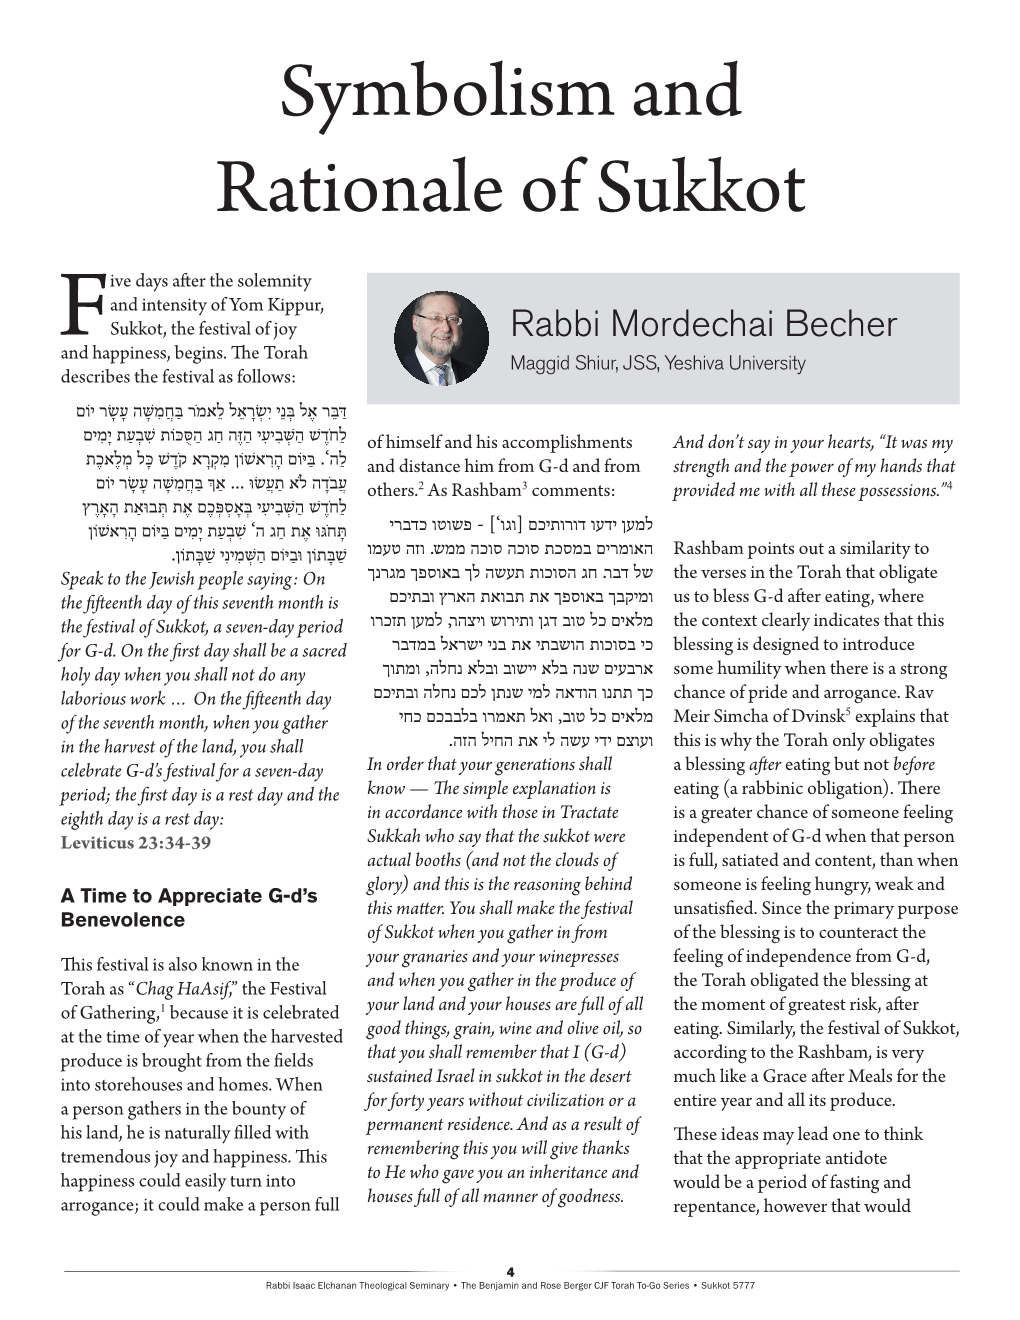 Symbolism and Rationale of Sukkot